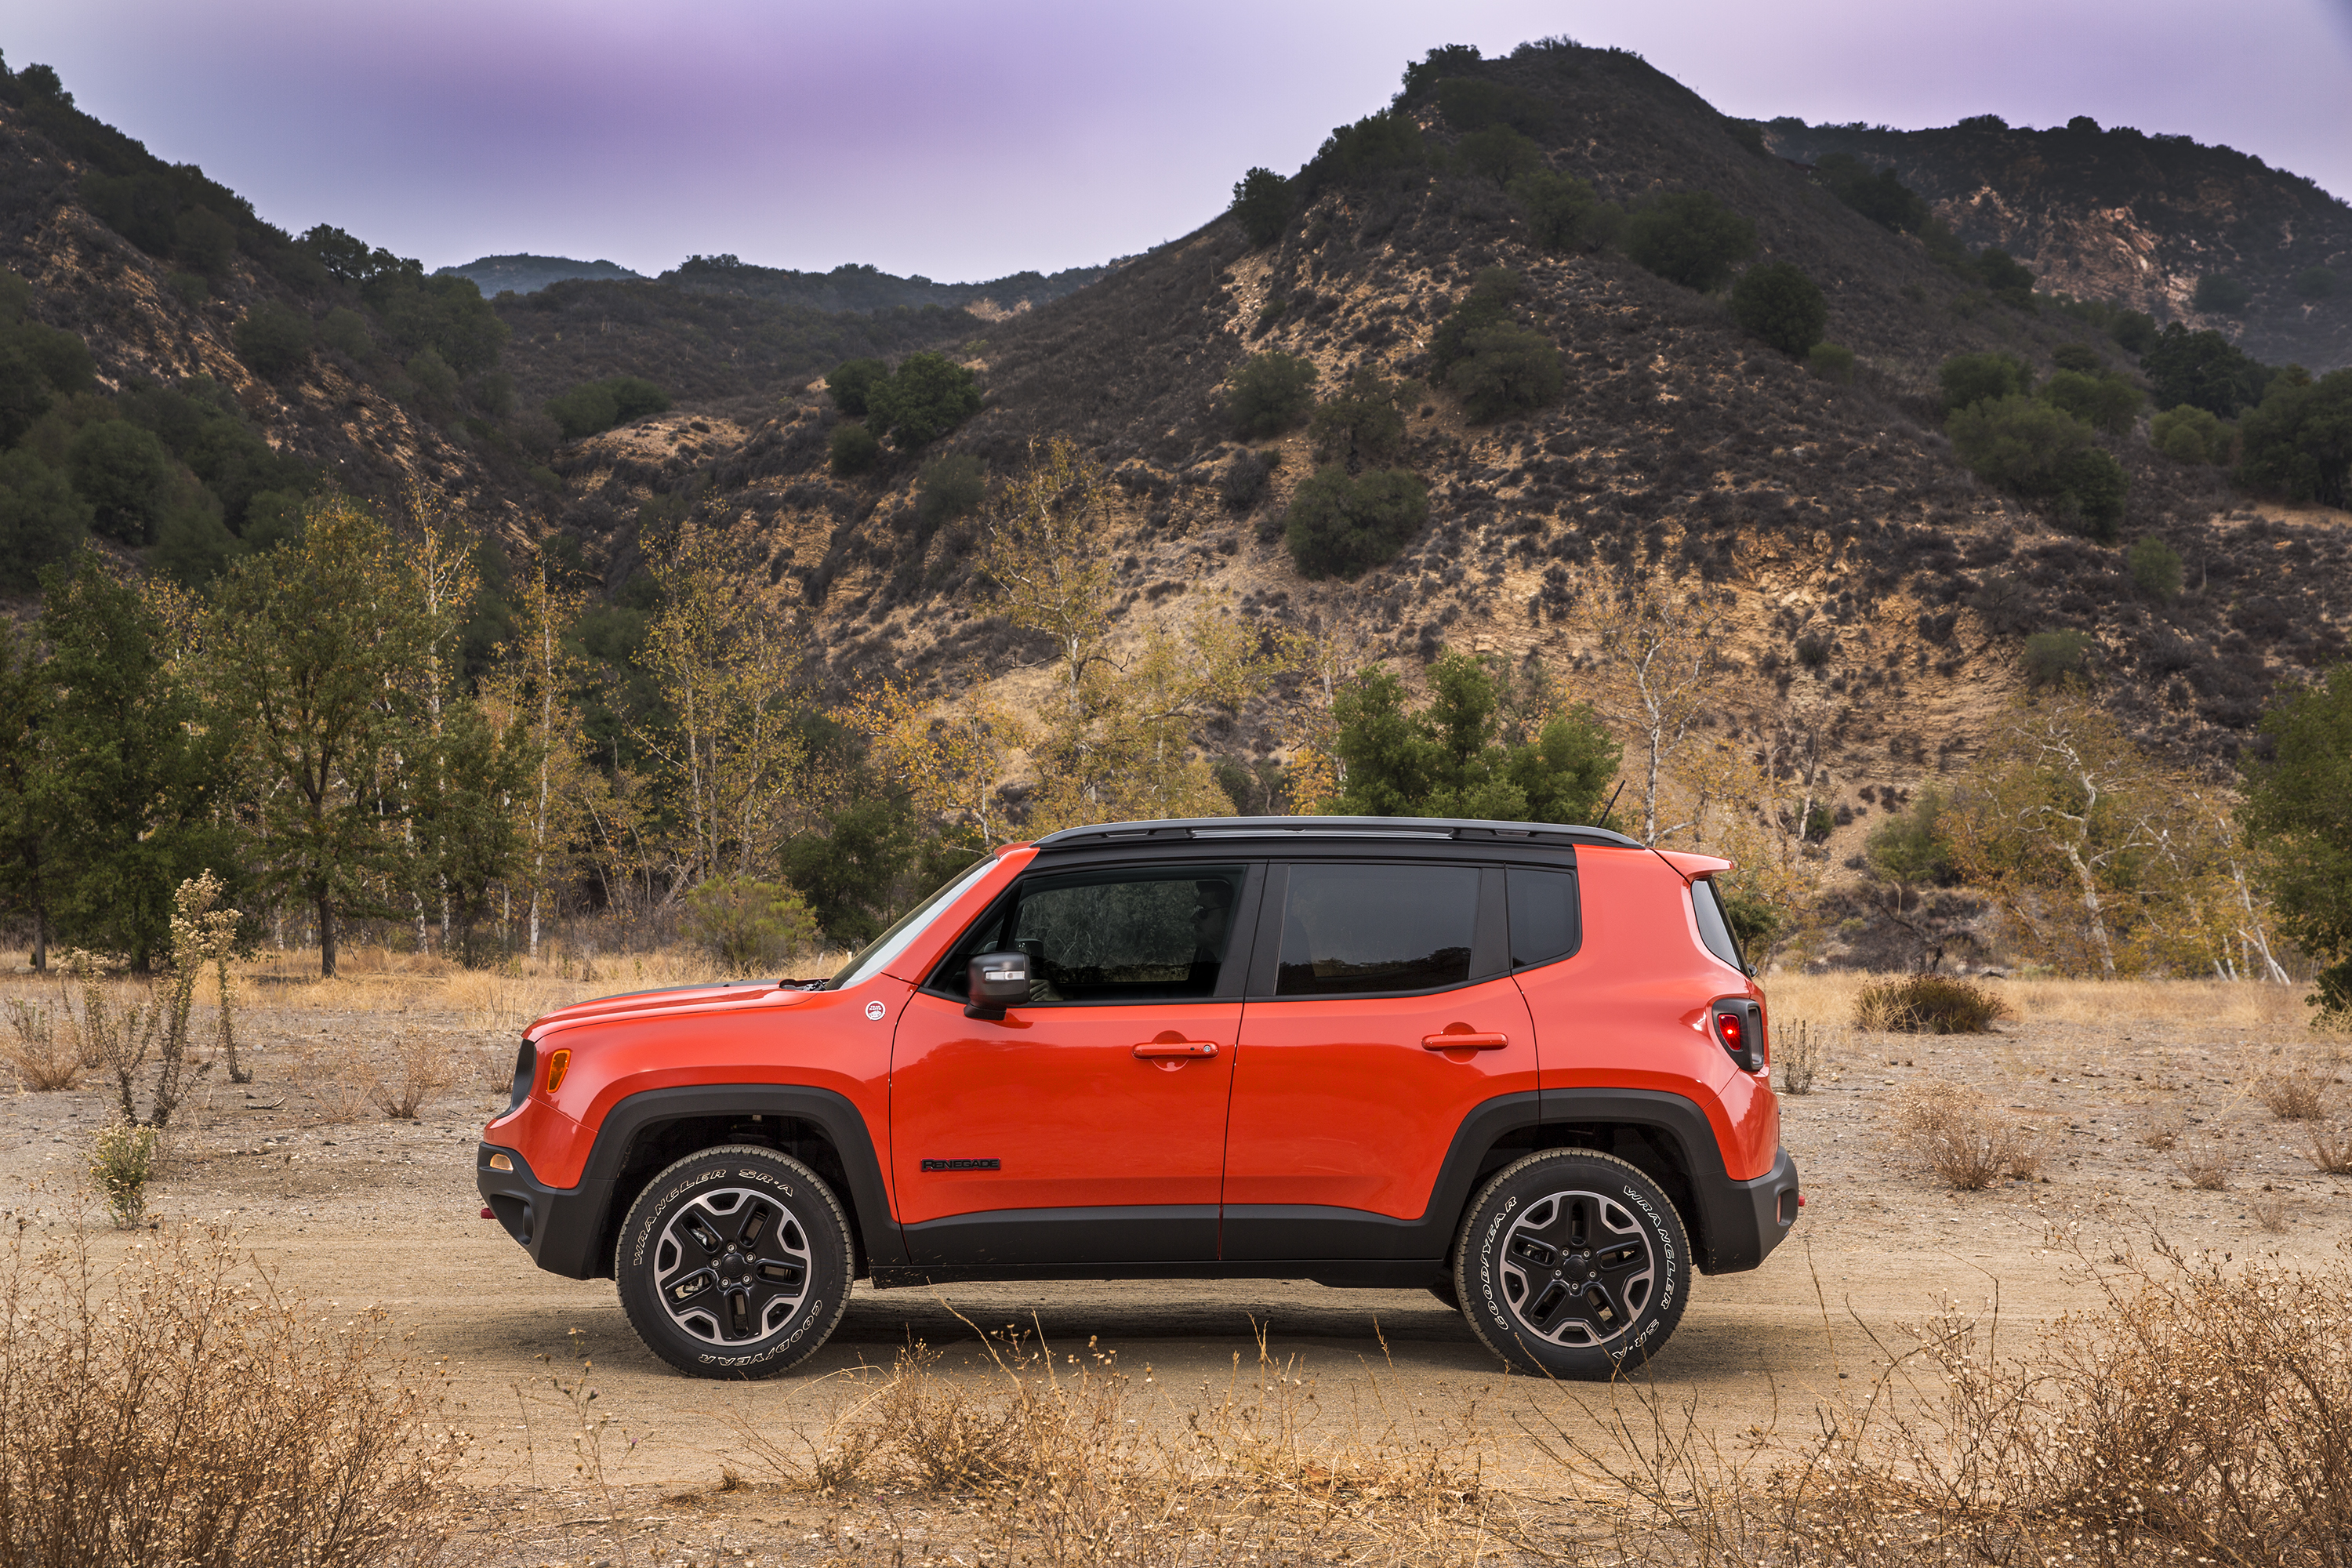 Jeep Renegade 4k specifications